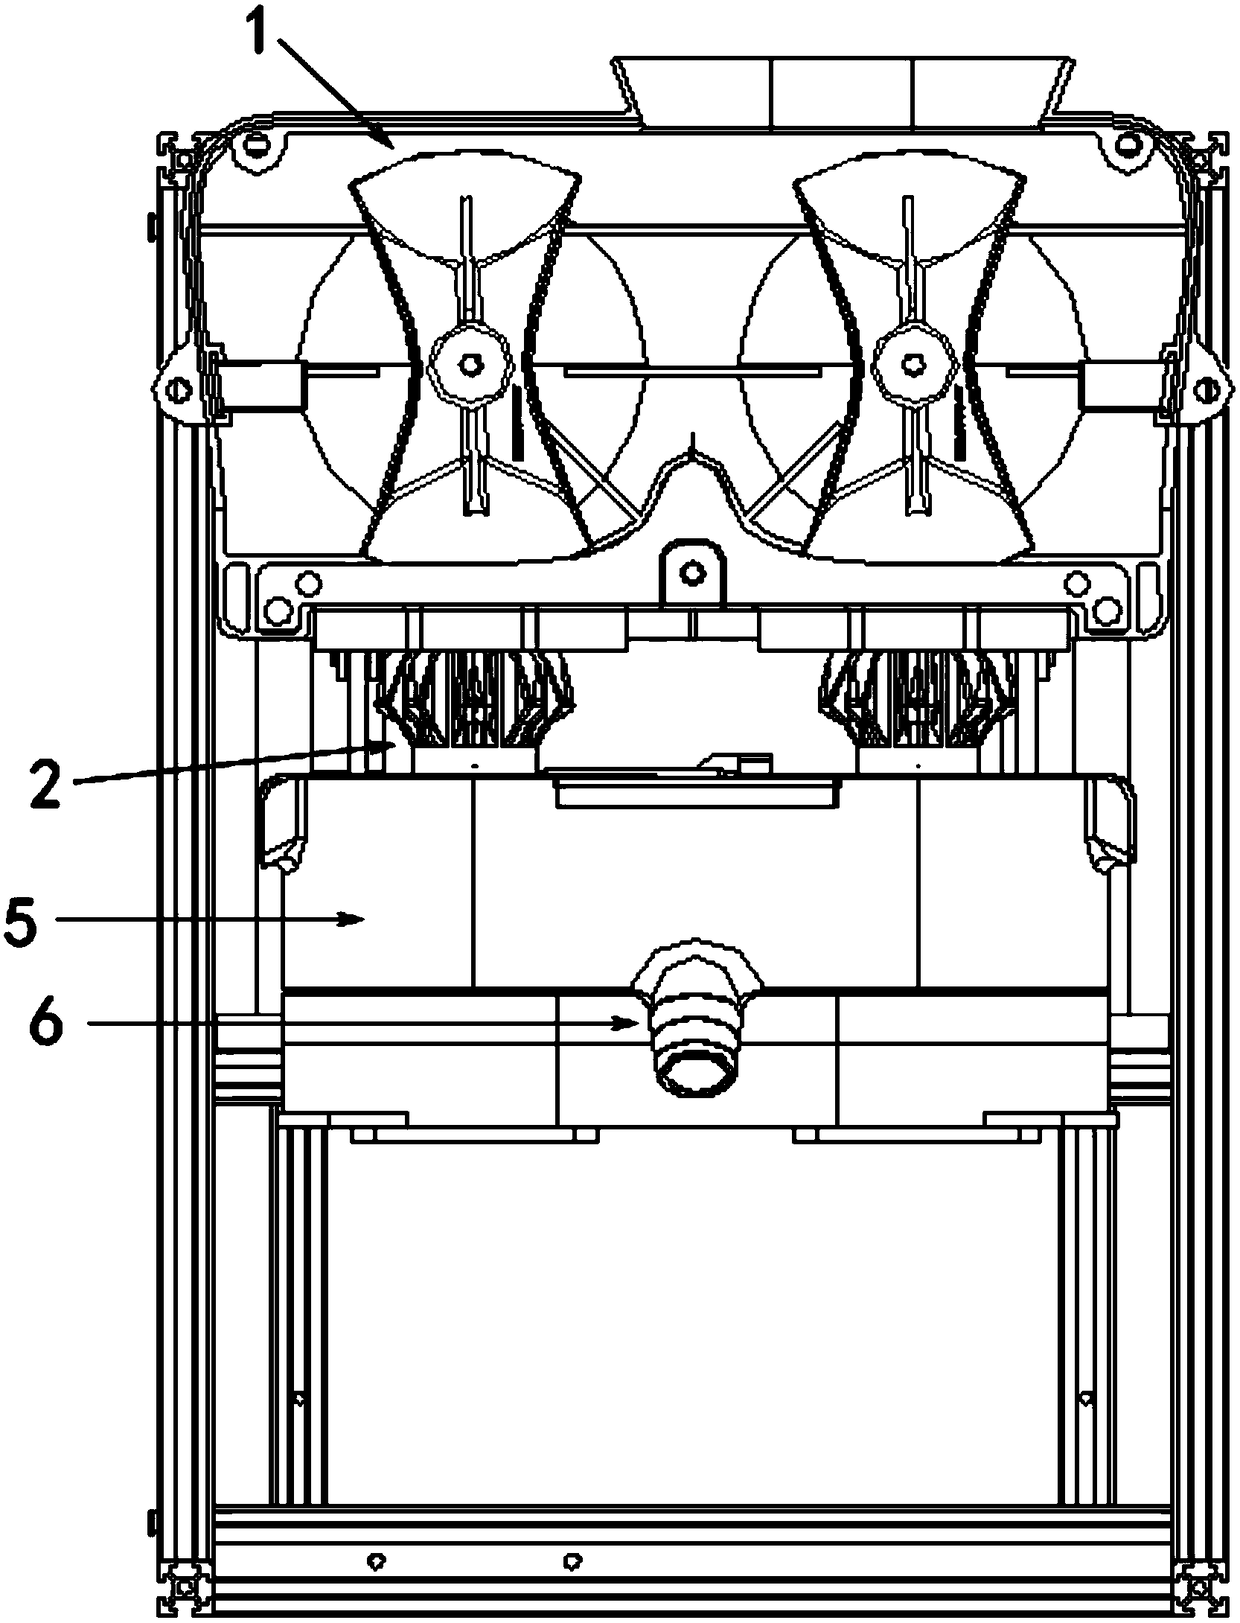 Juicing device for a juice extractor